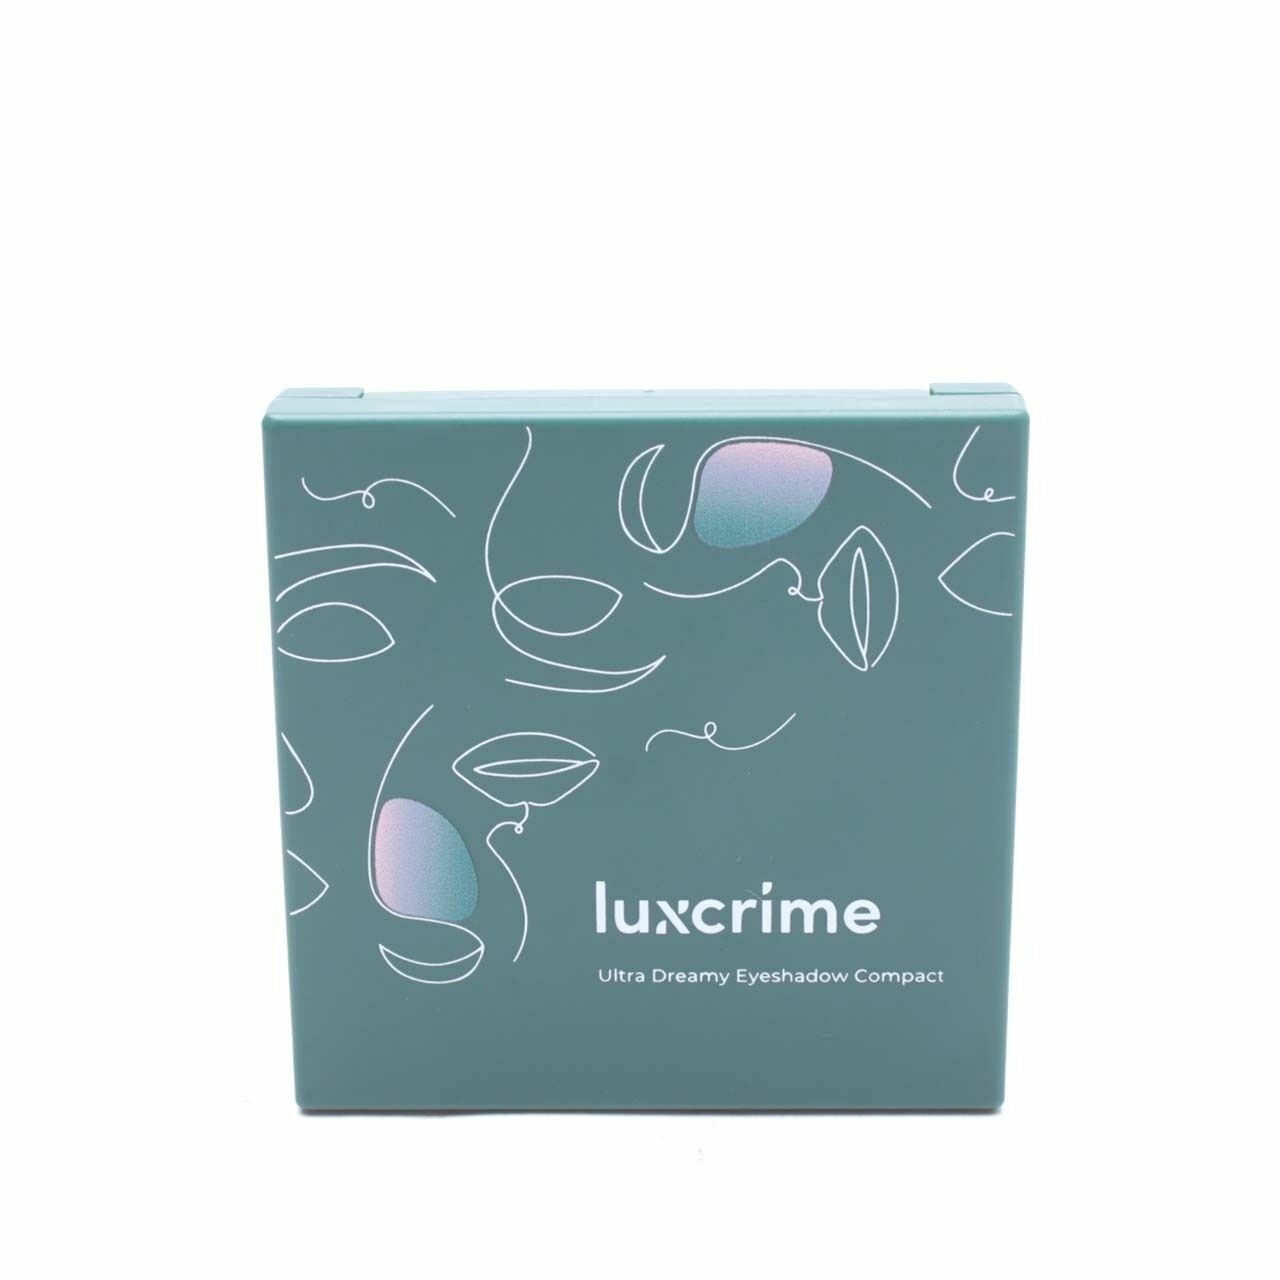 Luxcrime Ultra Dreamy Eyeshadow Compact - Blackforest Sets and Palette